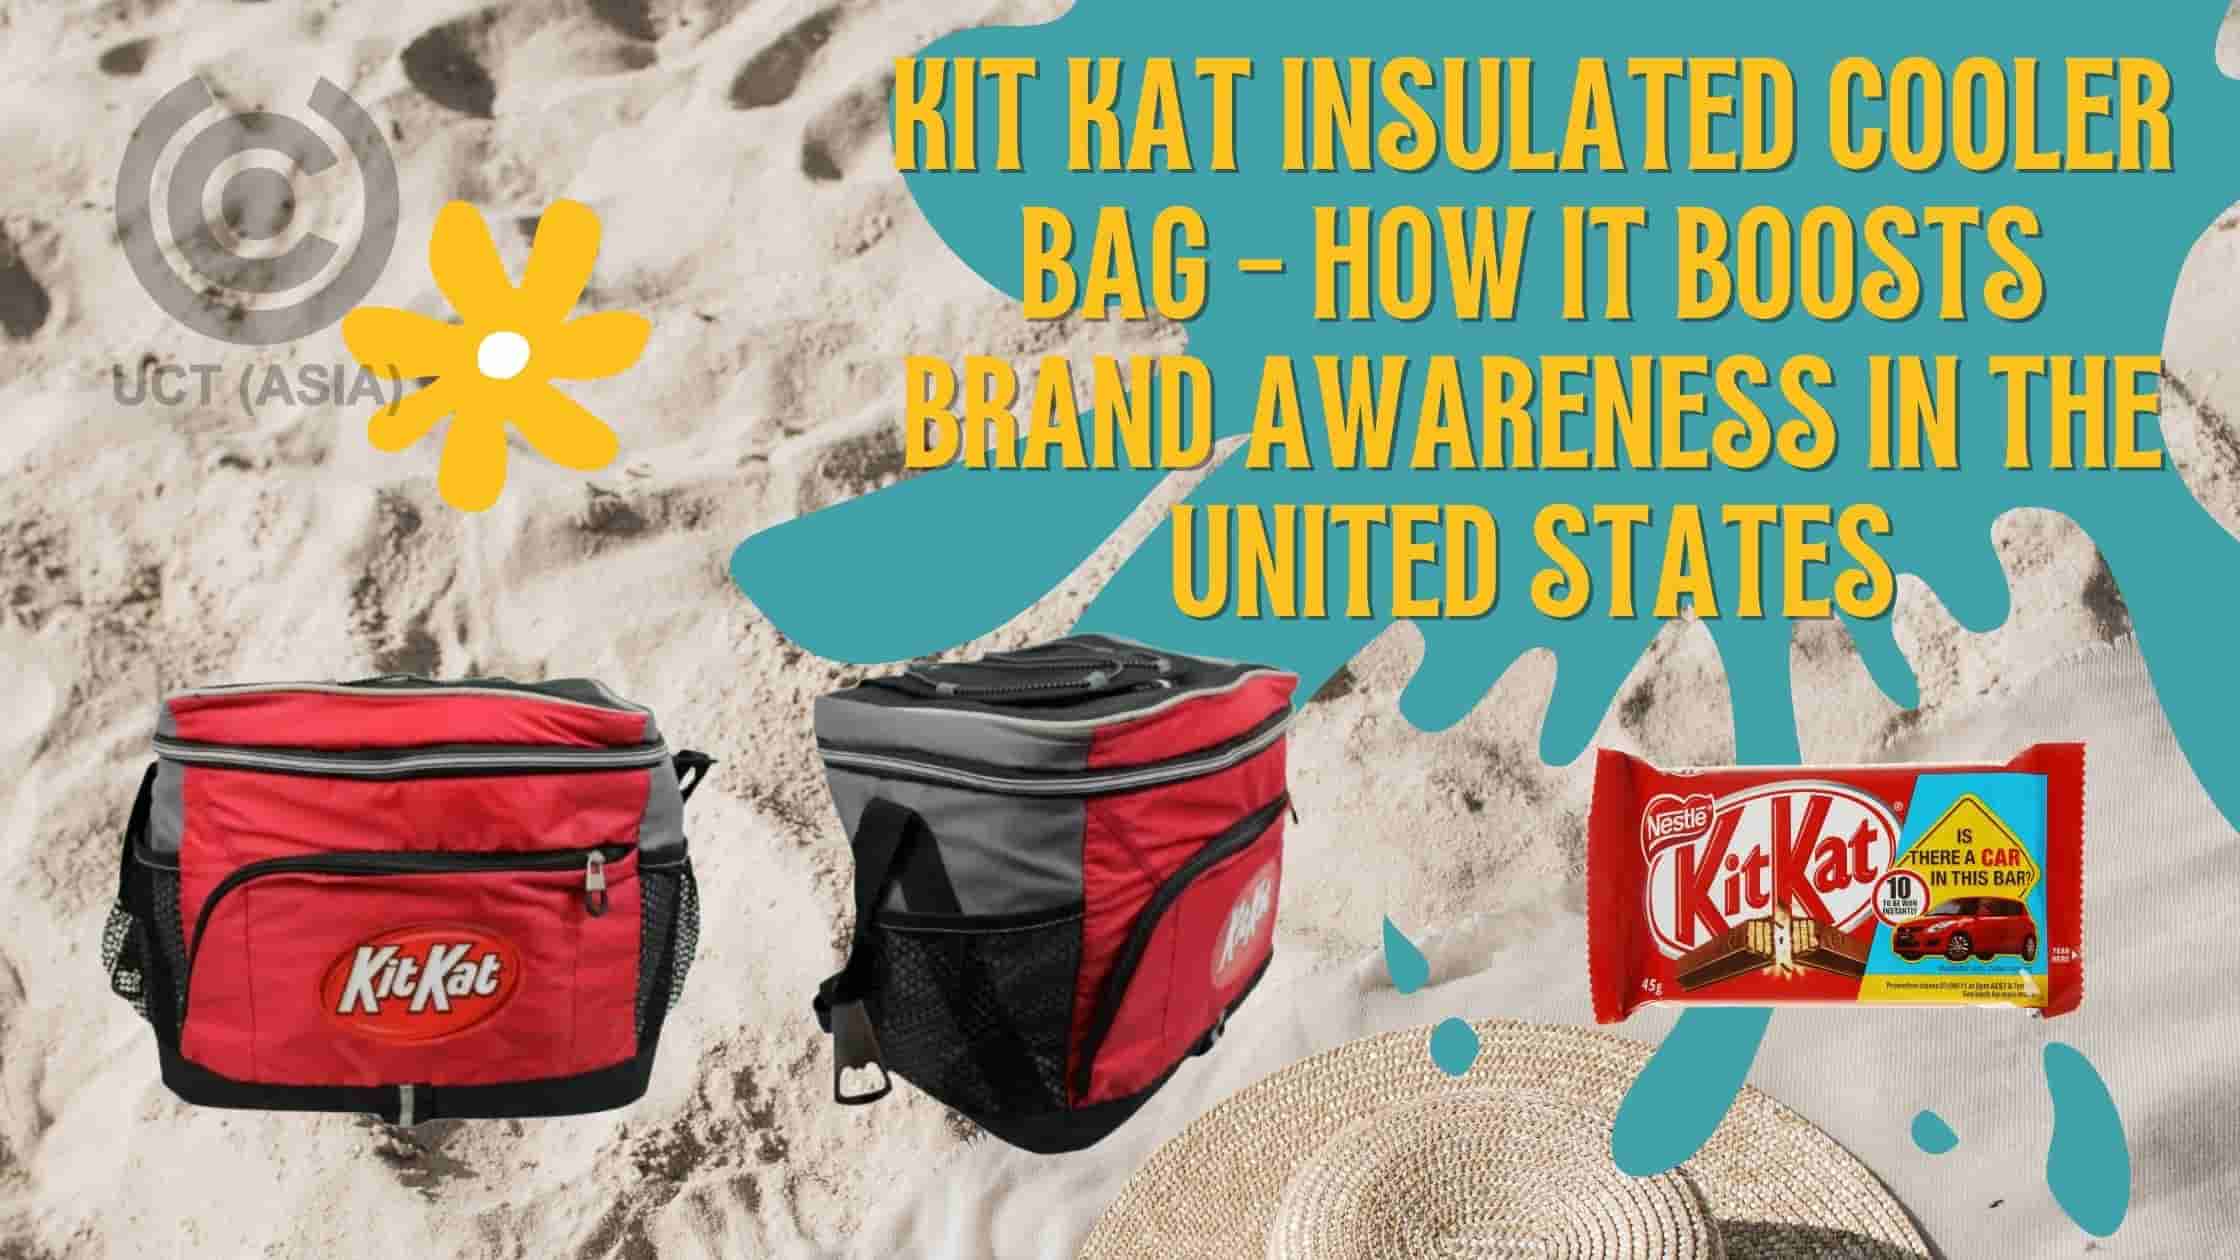 Kit Kat Insulated Cooler Bag - How it boosts brand awareness in the United States